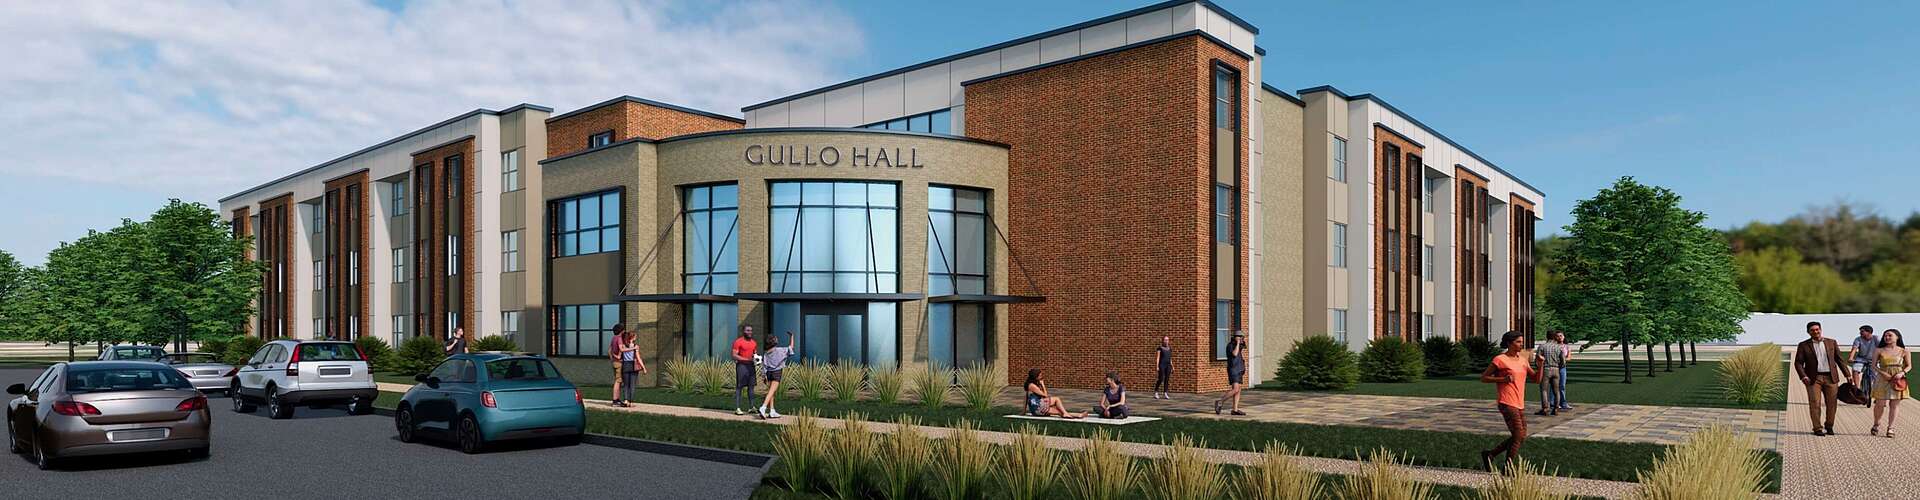 Entrance to Gullo Hall rendering